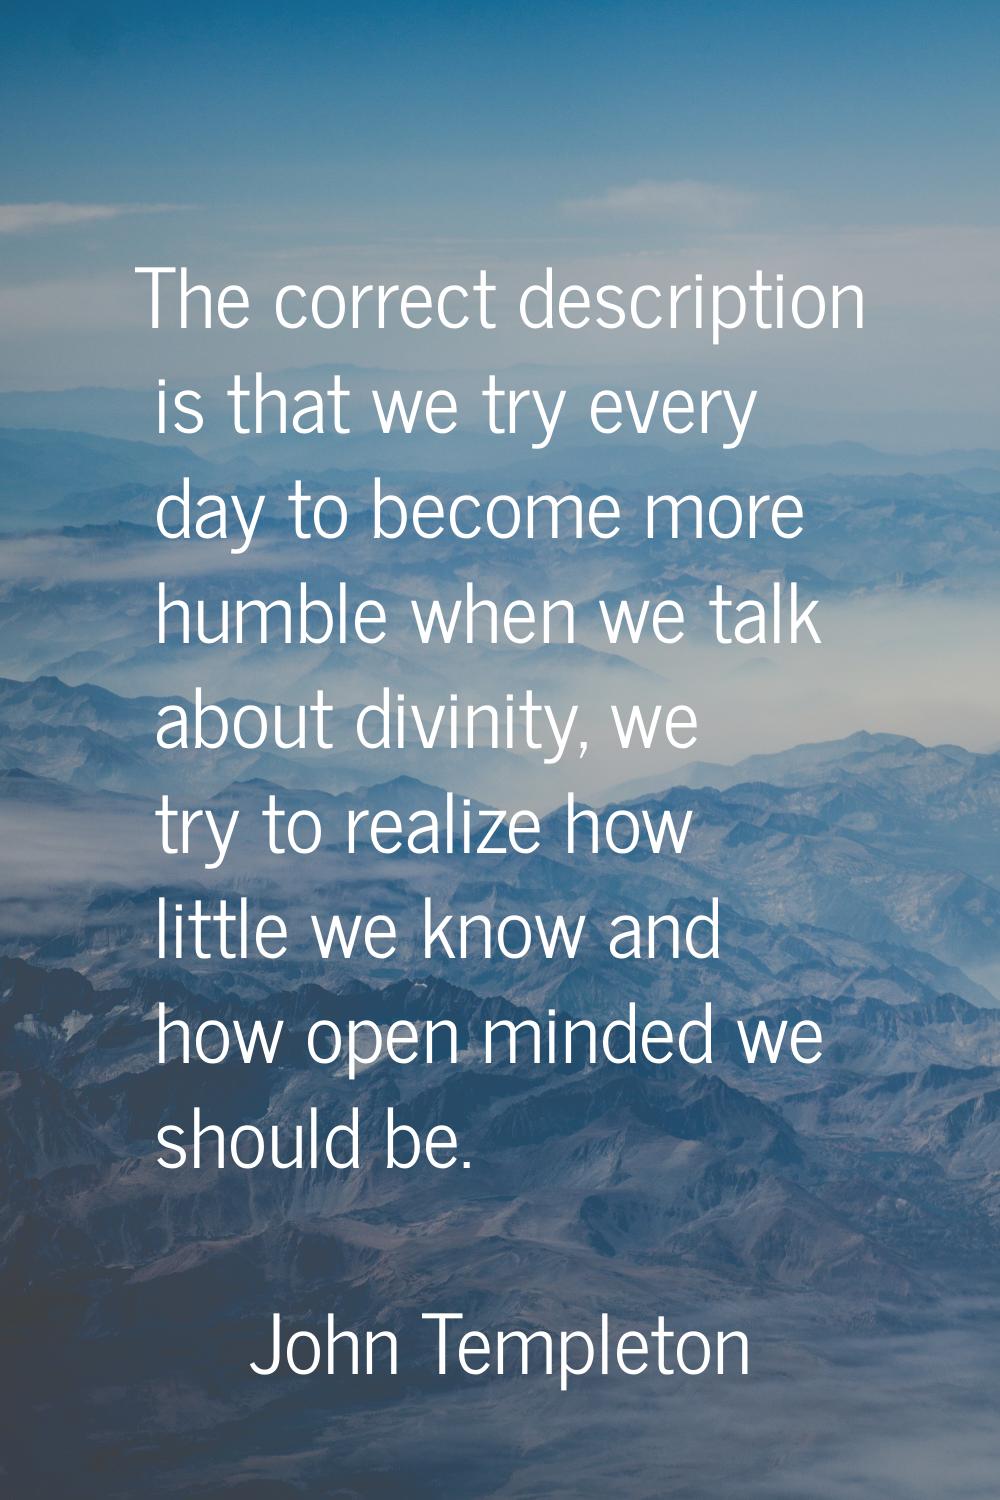 The correct description is that we try every day to become more humble when we talk about divinity,